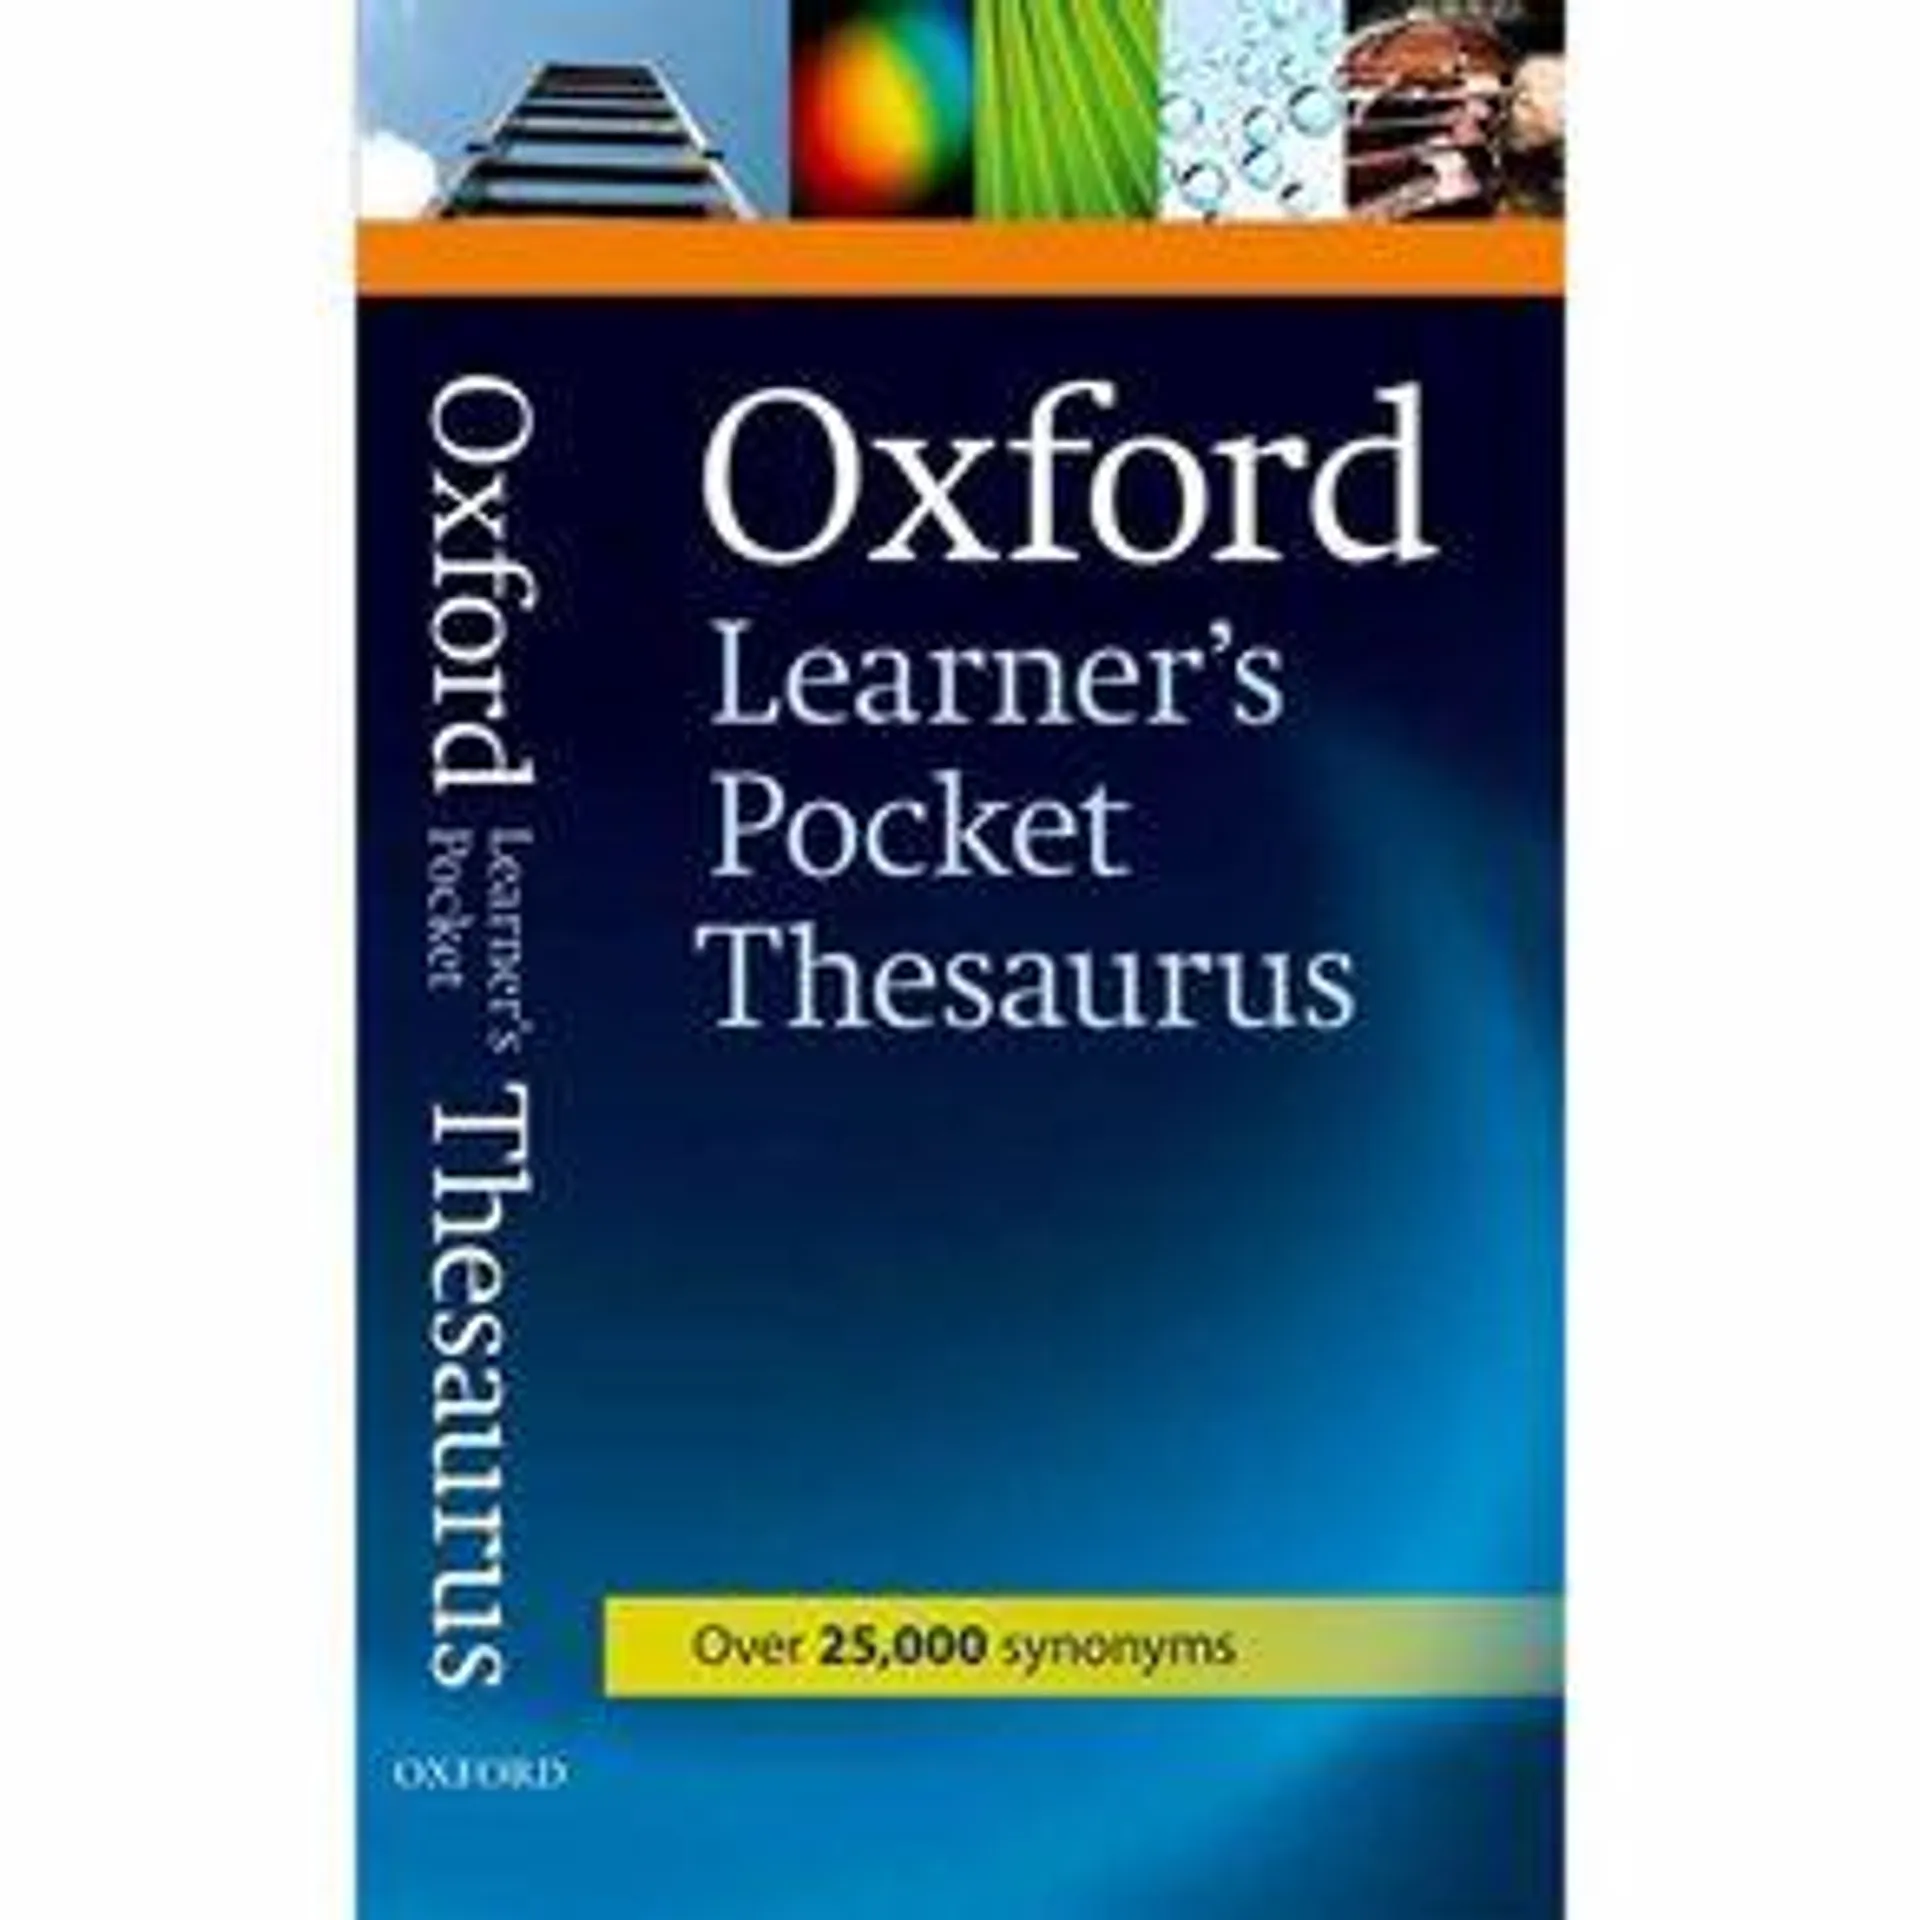 Oxford Learner's Pocket Thesaurus First Edition